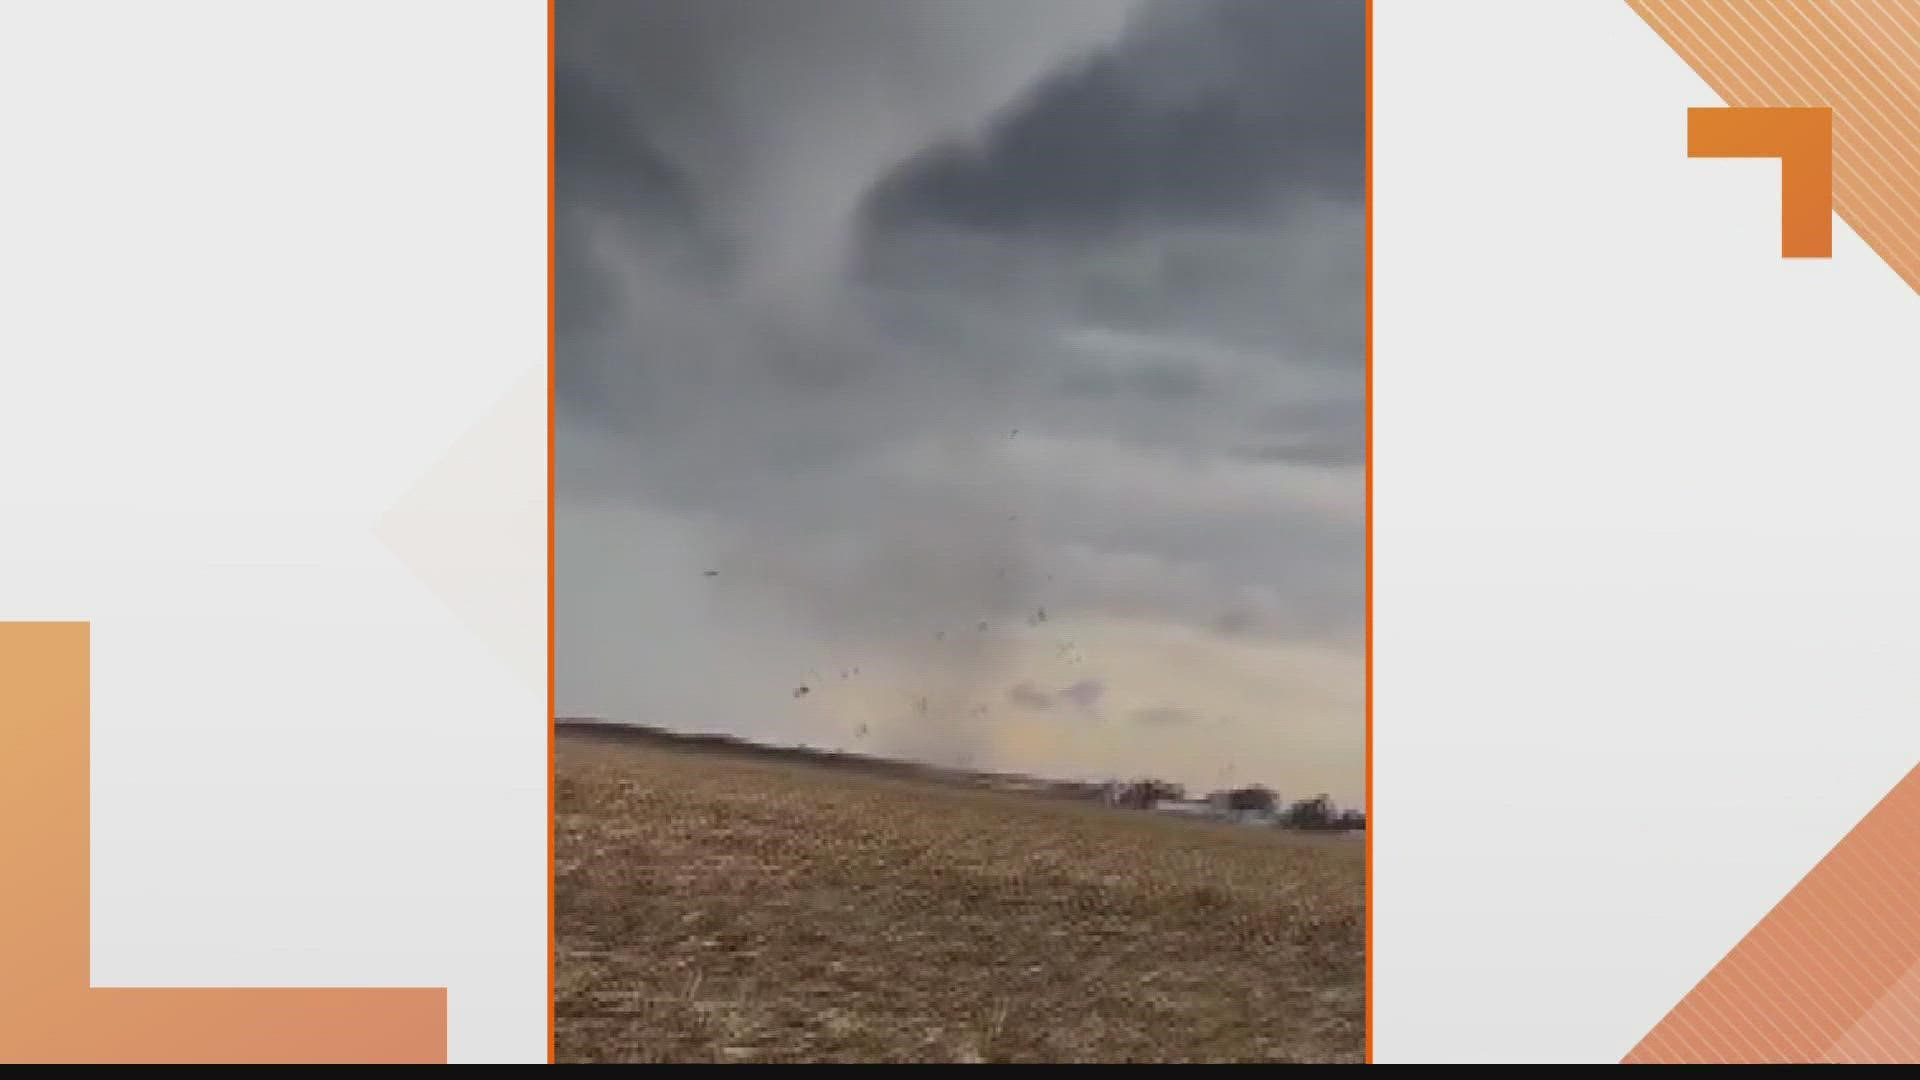 The National Weather Service said a tornado touched down near Athensville at 2:45 p.m.